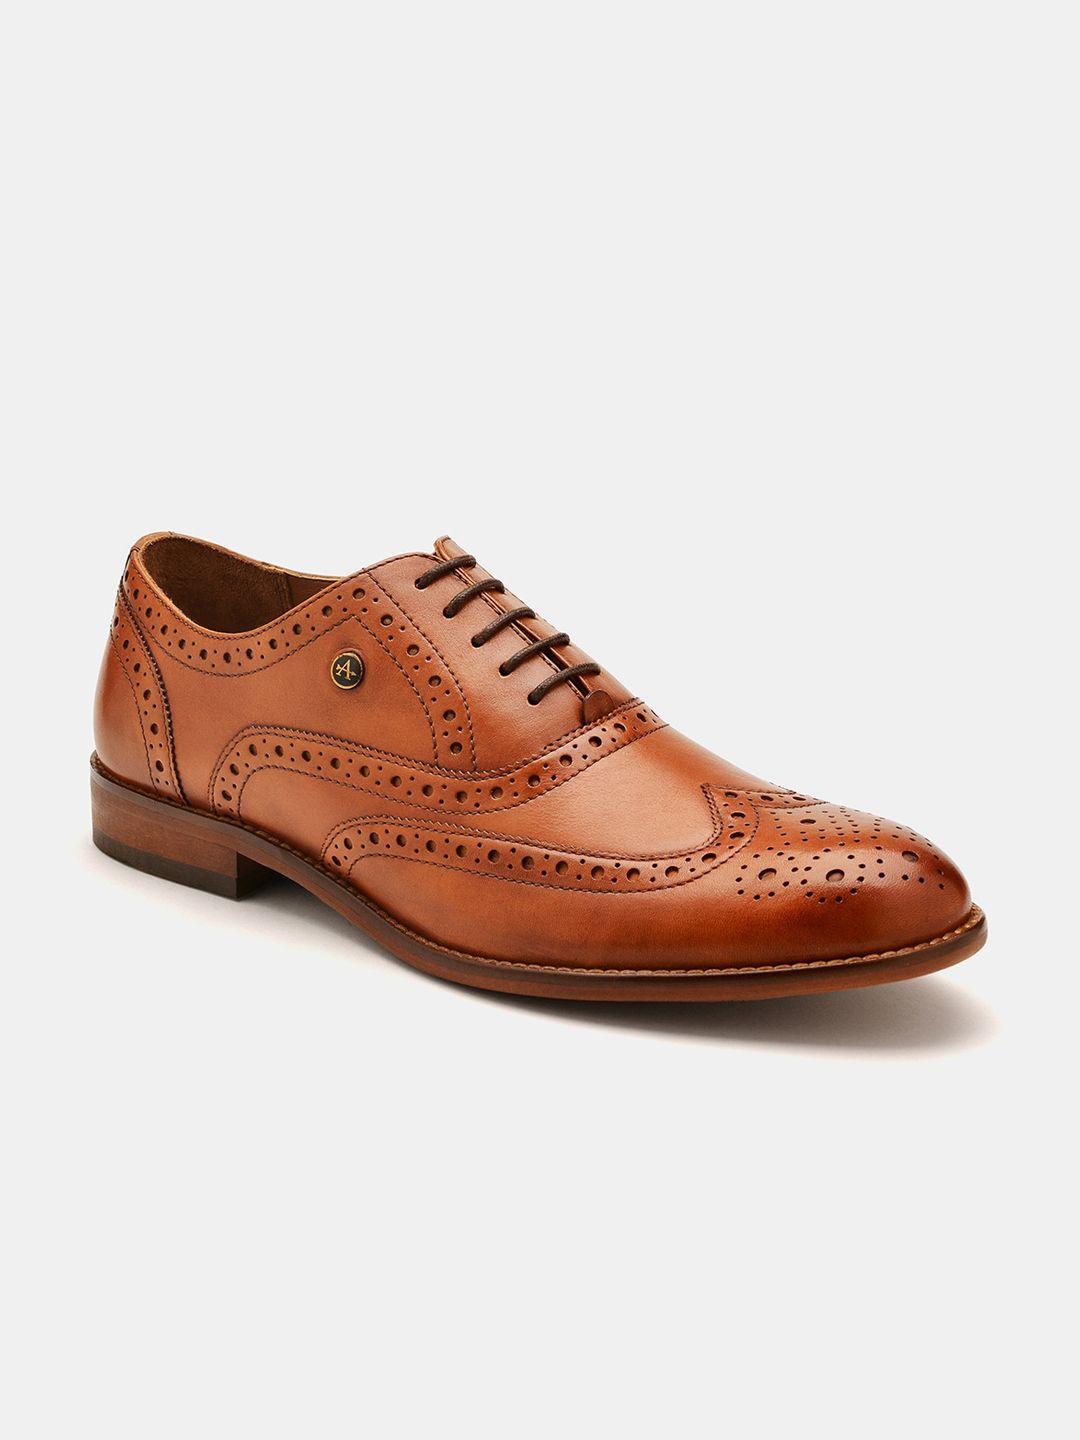 arrow-men-charter-textured-leather-formal-brogues